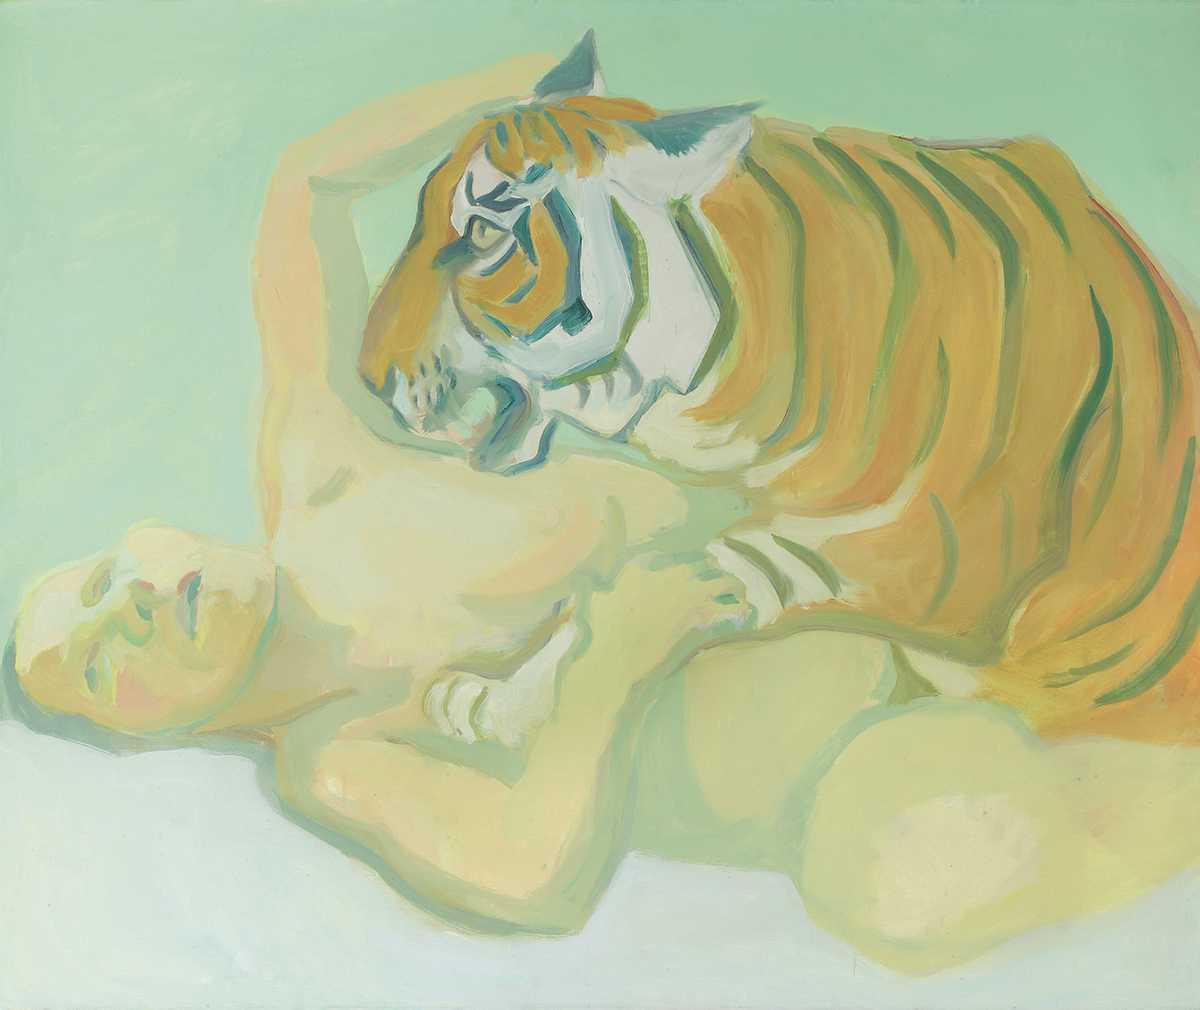 Maria Lassnig Sleeping with a tiger, 1975 Oil on canvas The Albertina Museum, Vienna – Permanent loan from the Österreichische Nationalbank © Maria Lassnig Foundation